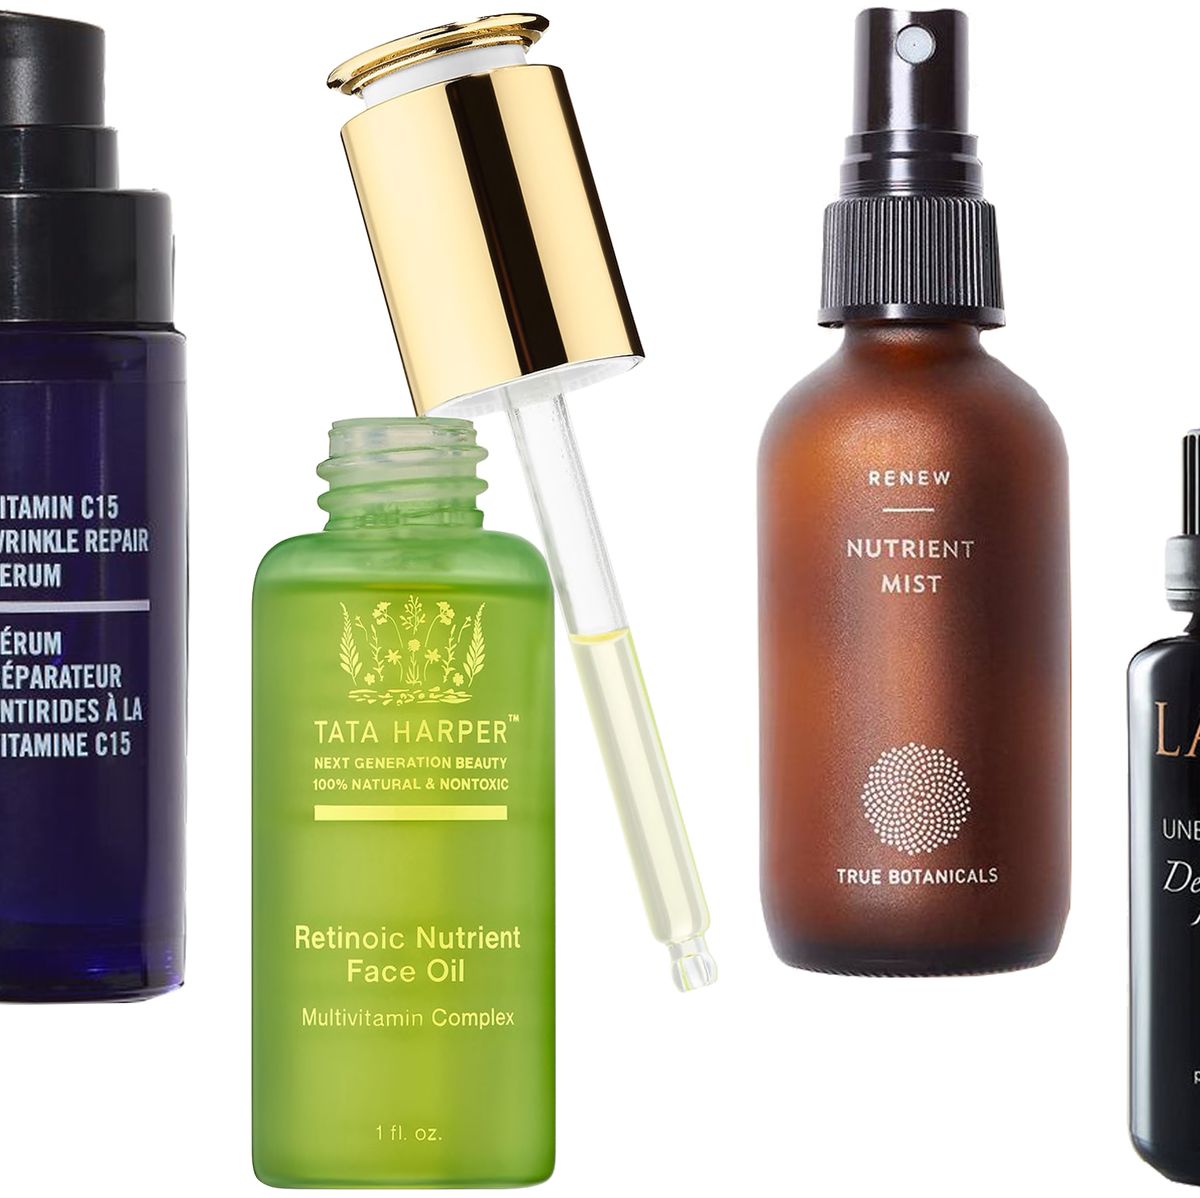 13 Best Natural & Organic Skincare Products - Non-Toxic and Chemical-Free